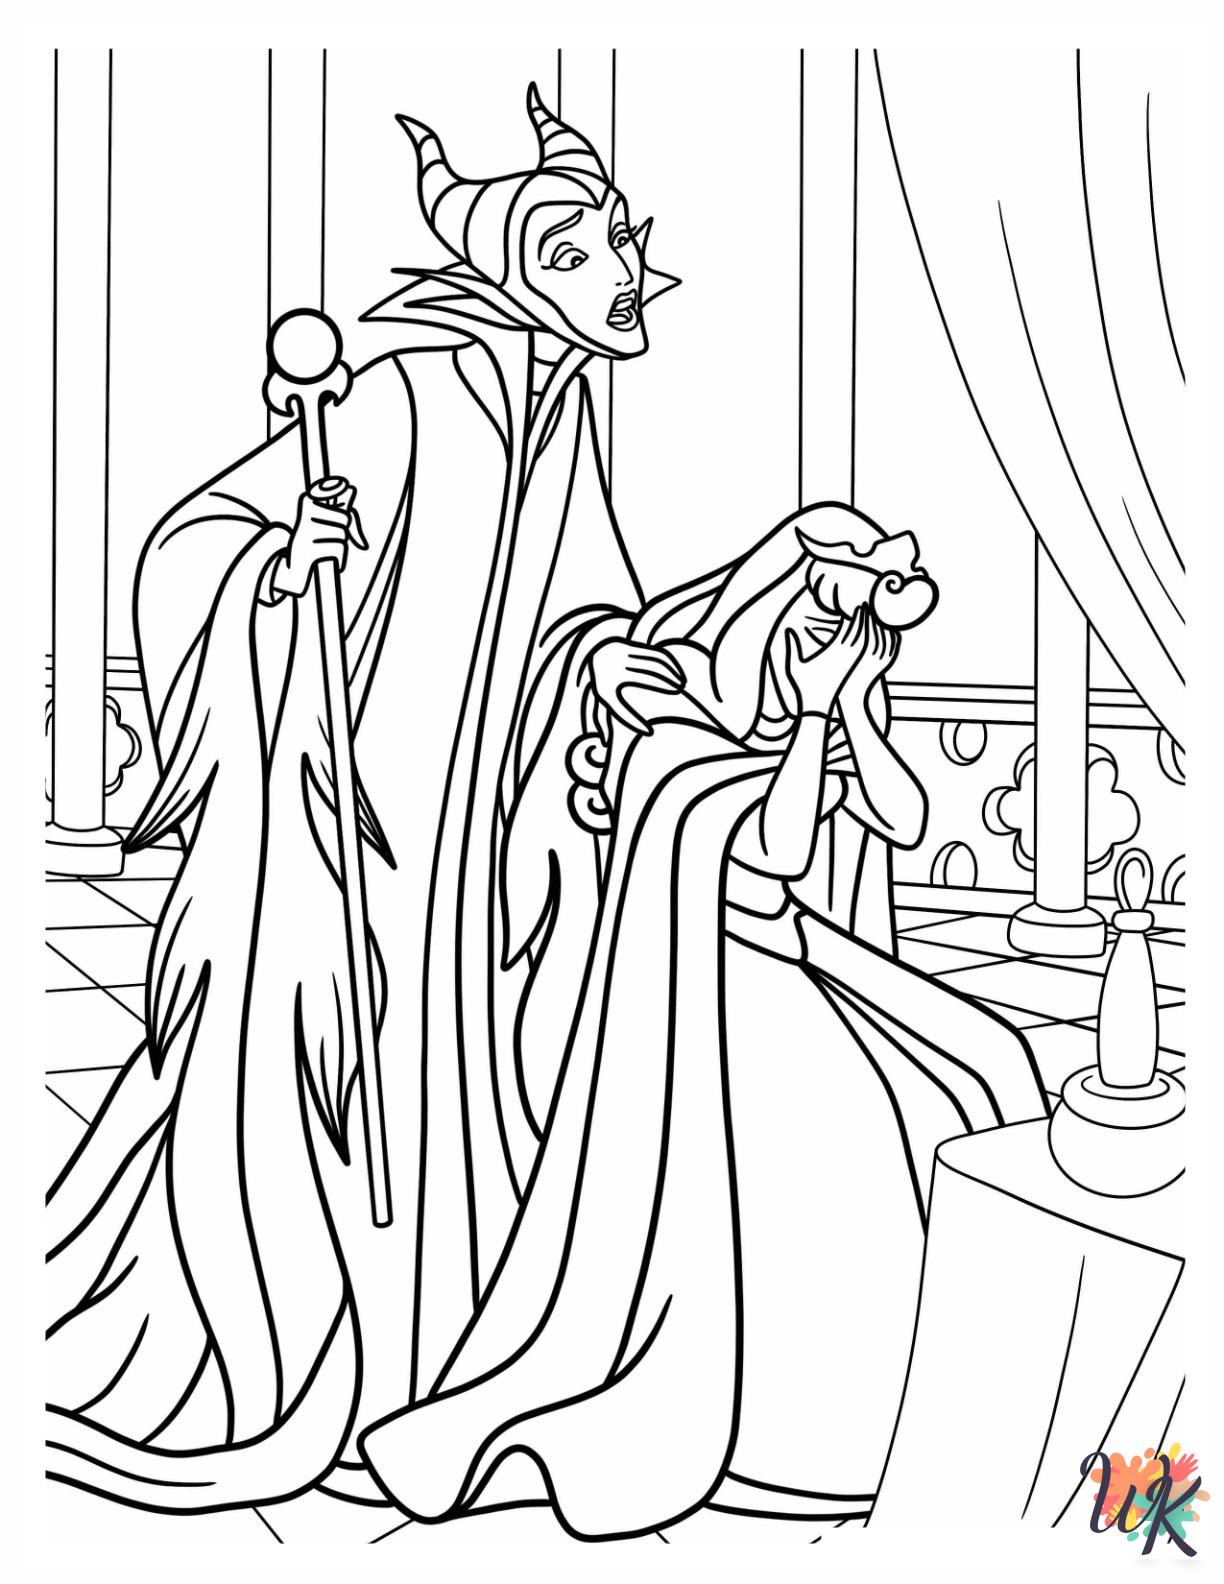 easy Maleficent coloring pages